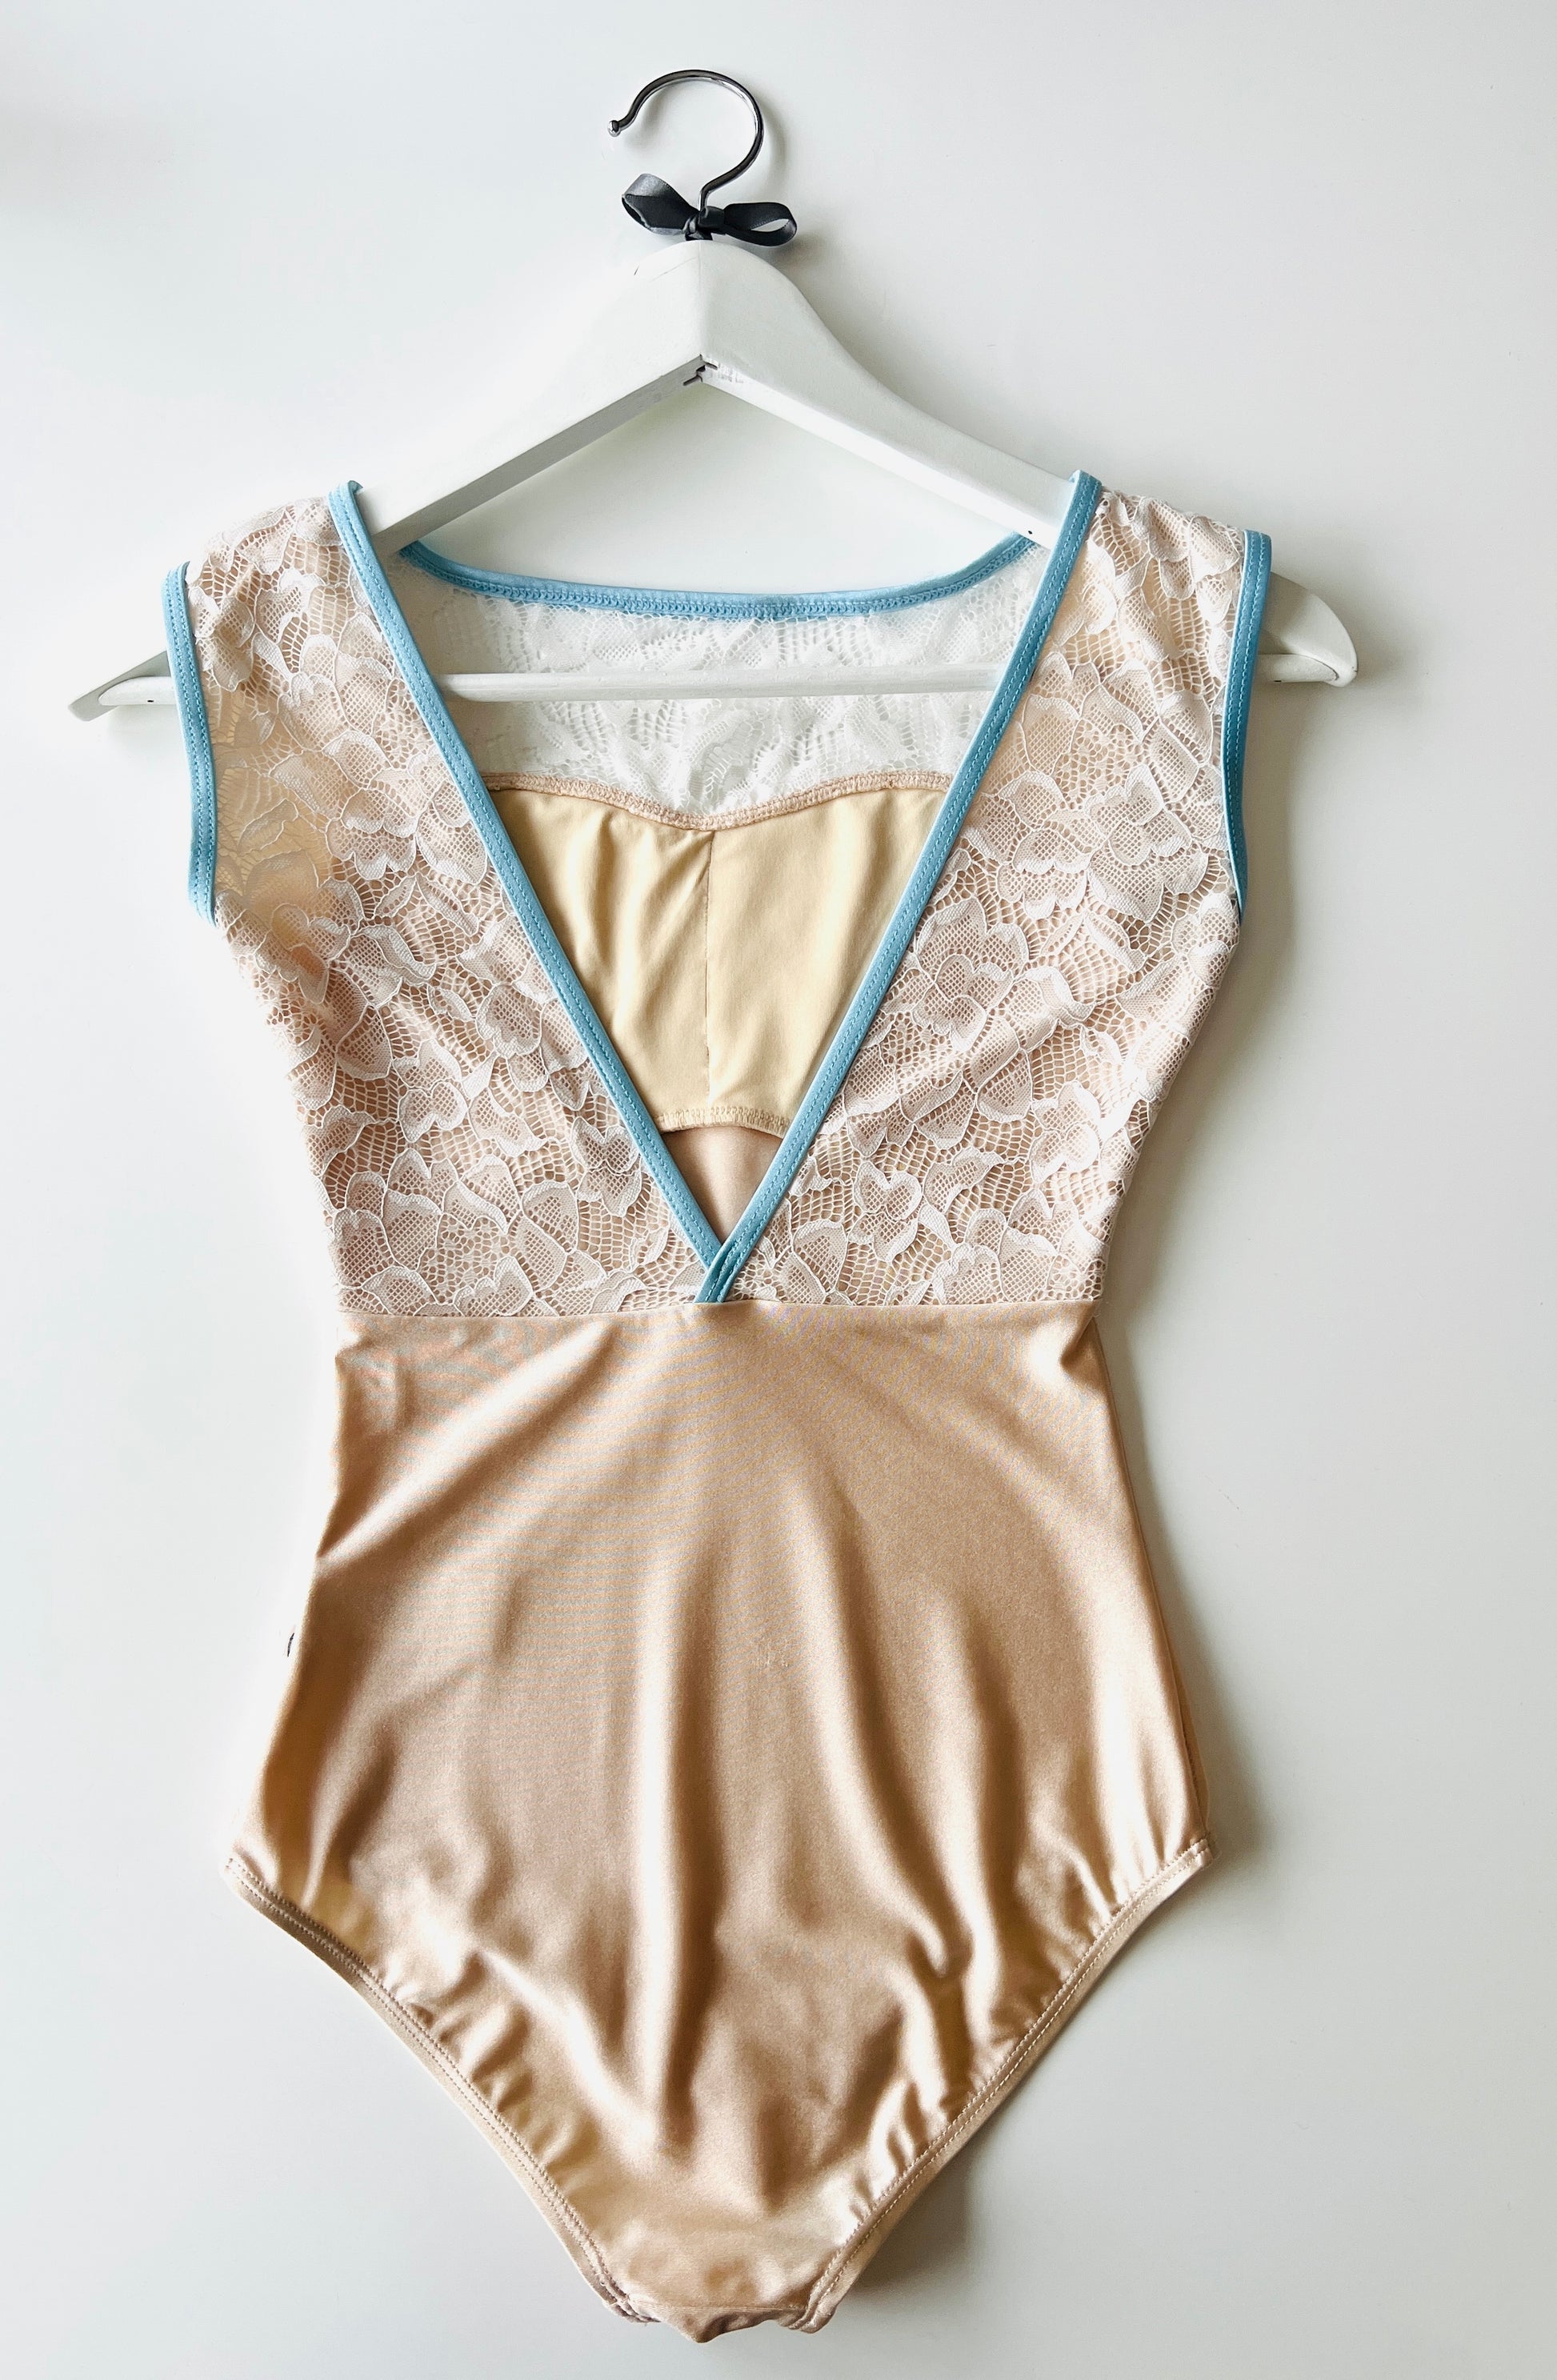 Chloe Lace Cap Sleeve Leotard in Cream from Olivine and sold by The Collective Dancewear